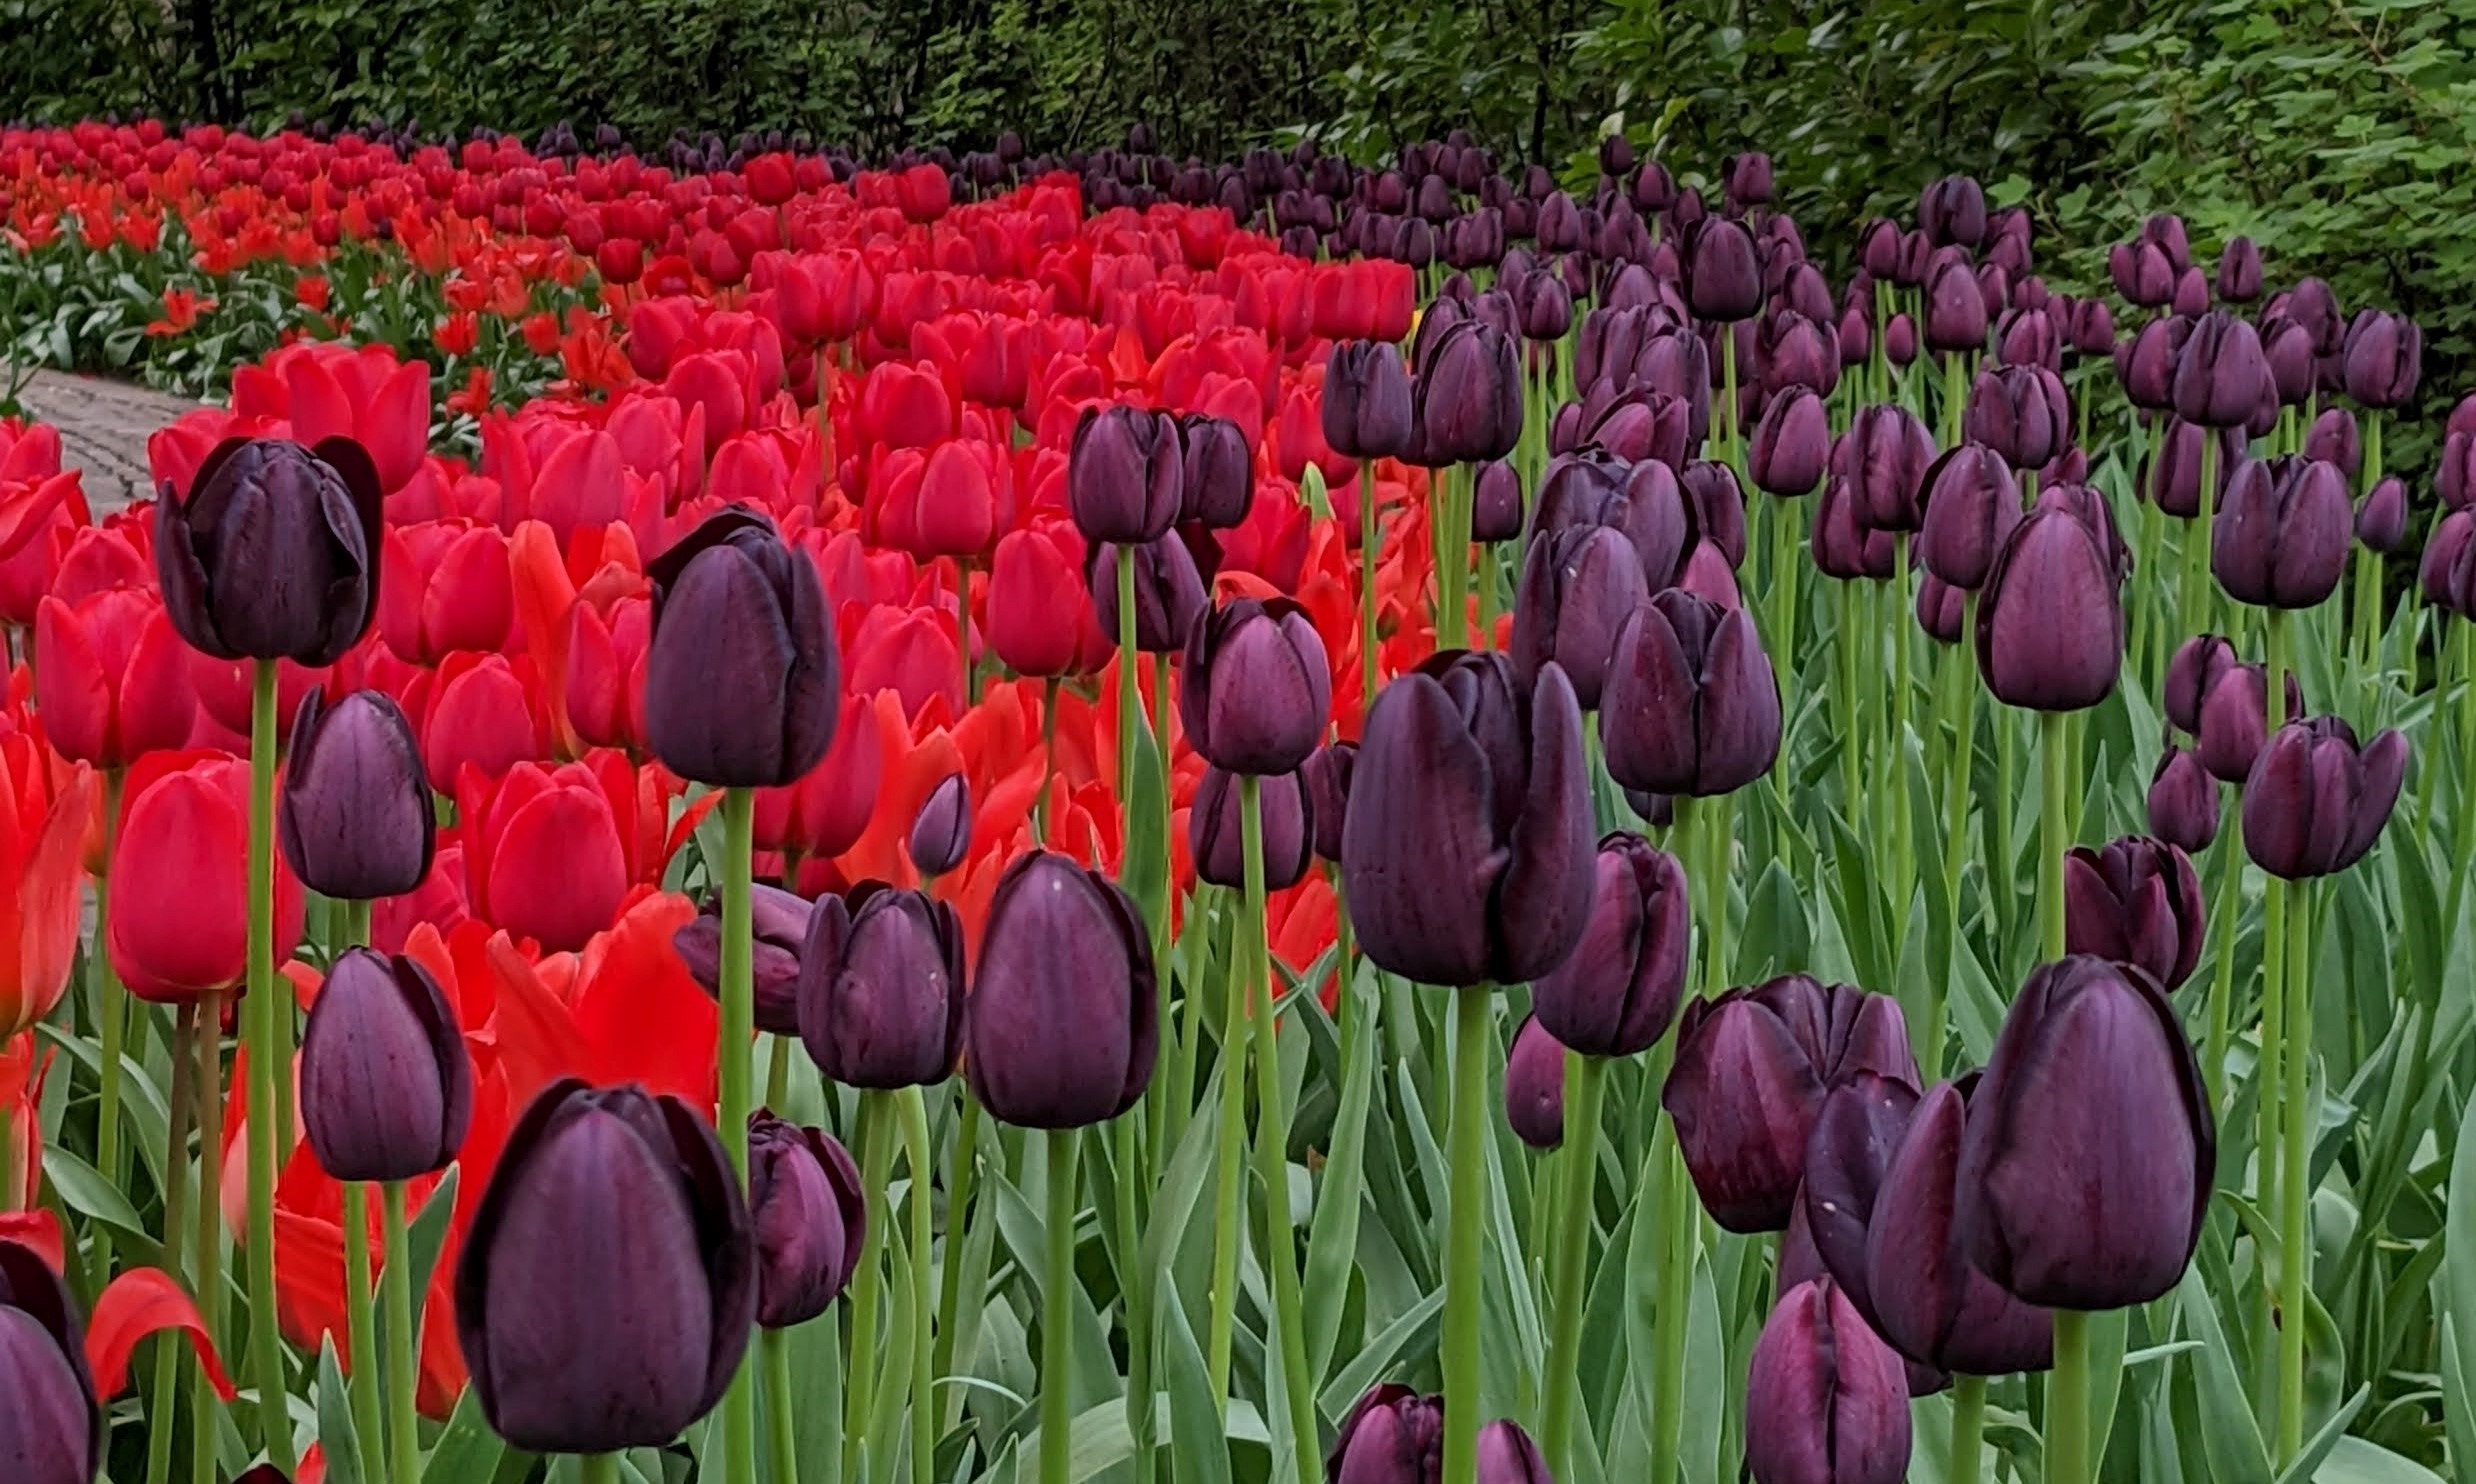 The Complete Guide to Tulip Festival in April at Keukenhof